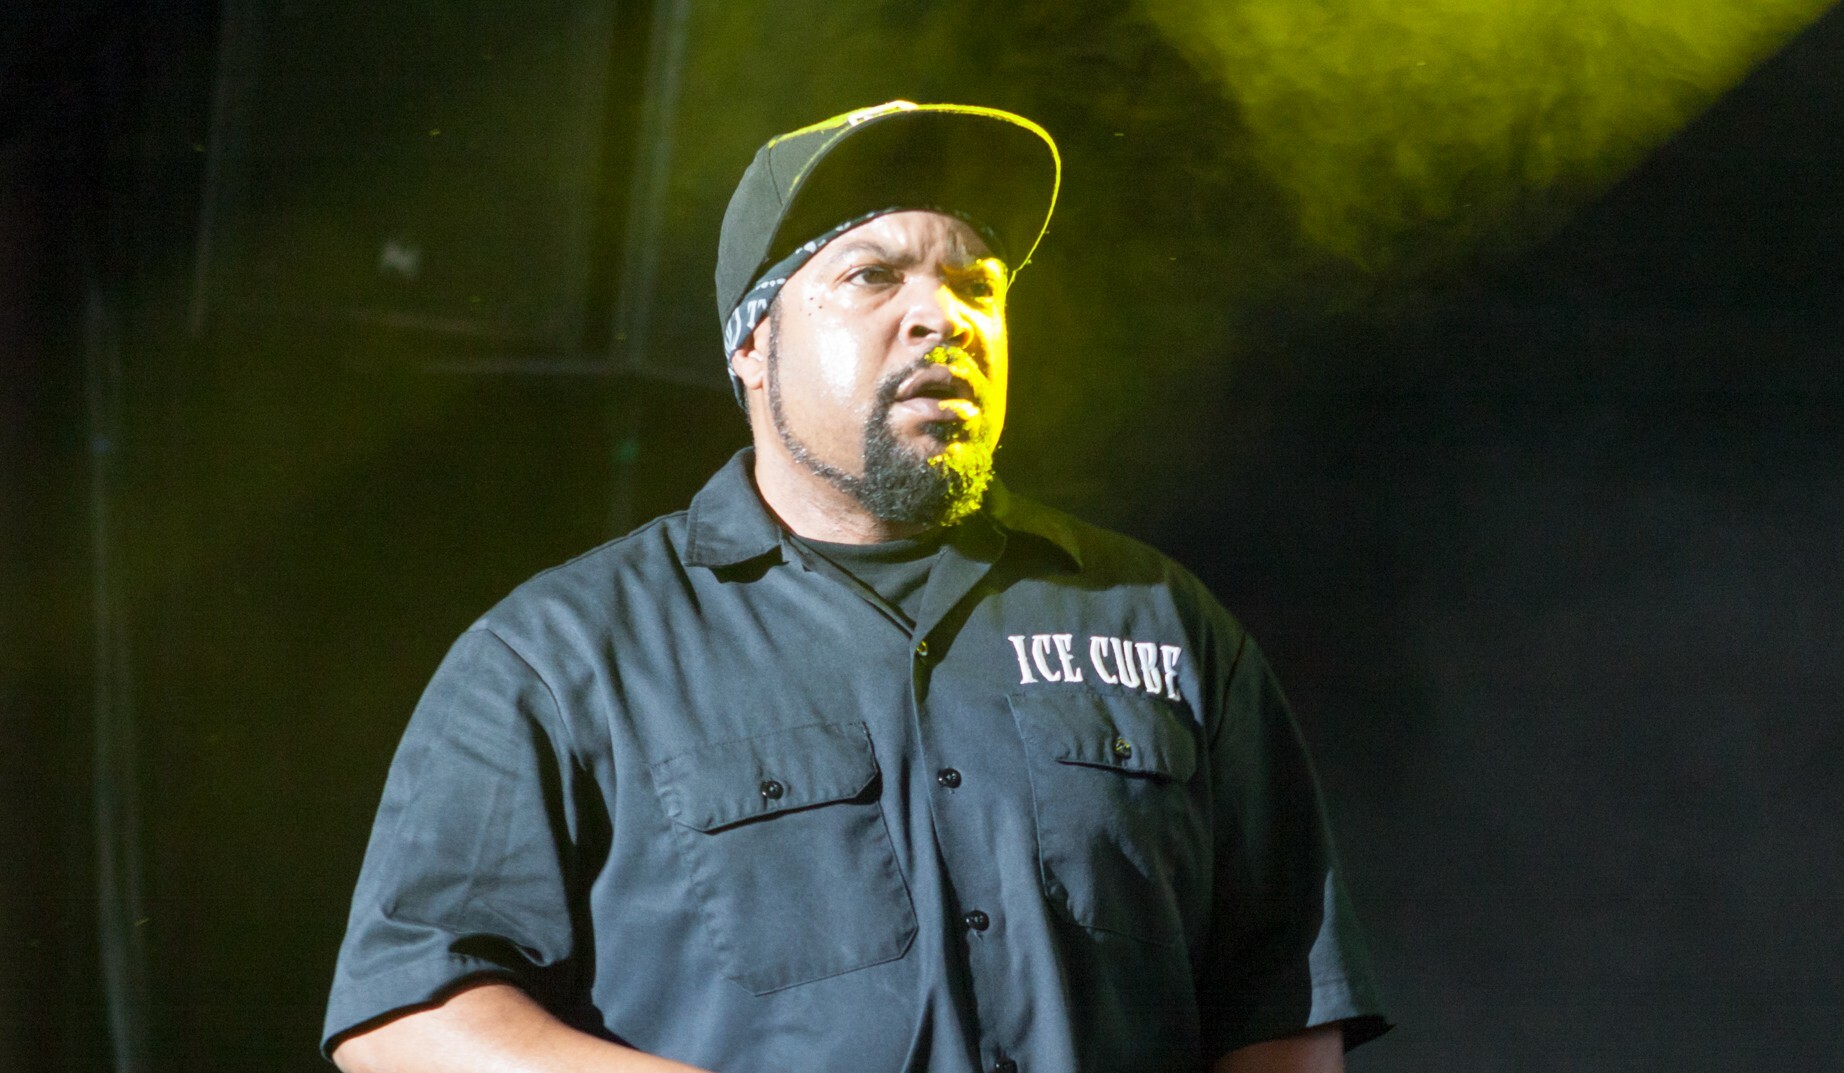 ice-cube-at-london’s-o2-arena:-timings-and-everything-you-need-to-know